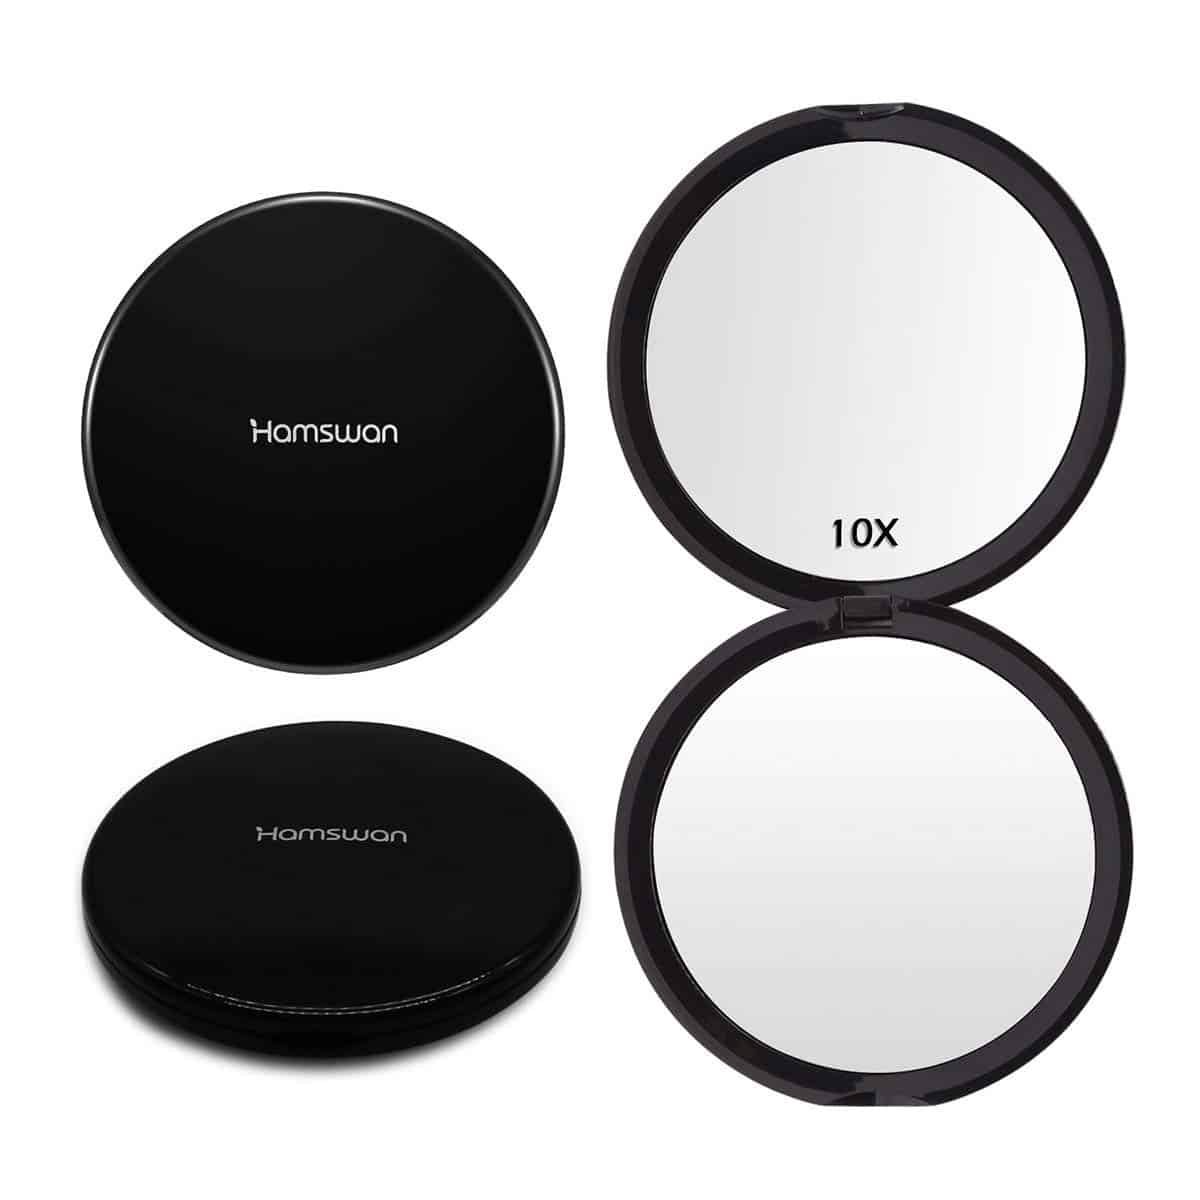 Portable Pocket Mirror with 1X 10X Magnifying $4.99 (REG $19.99)